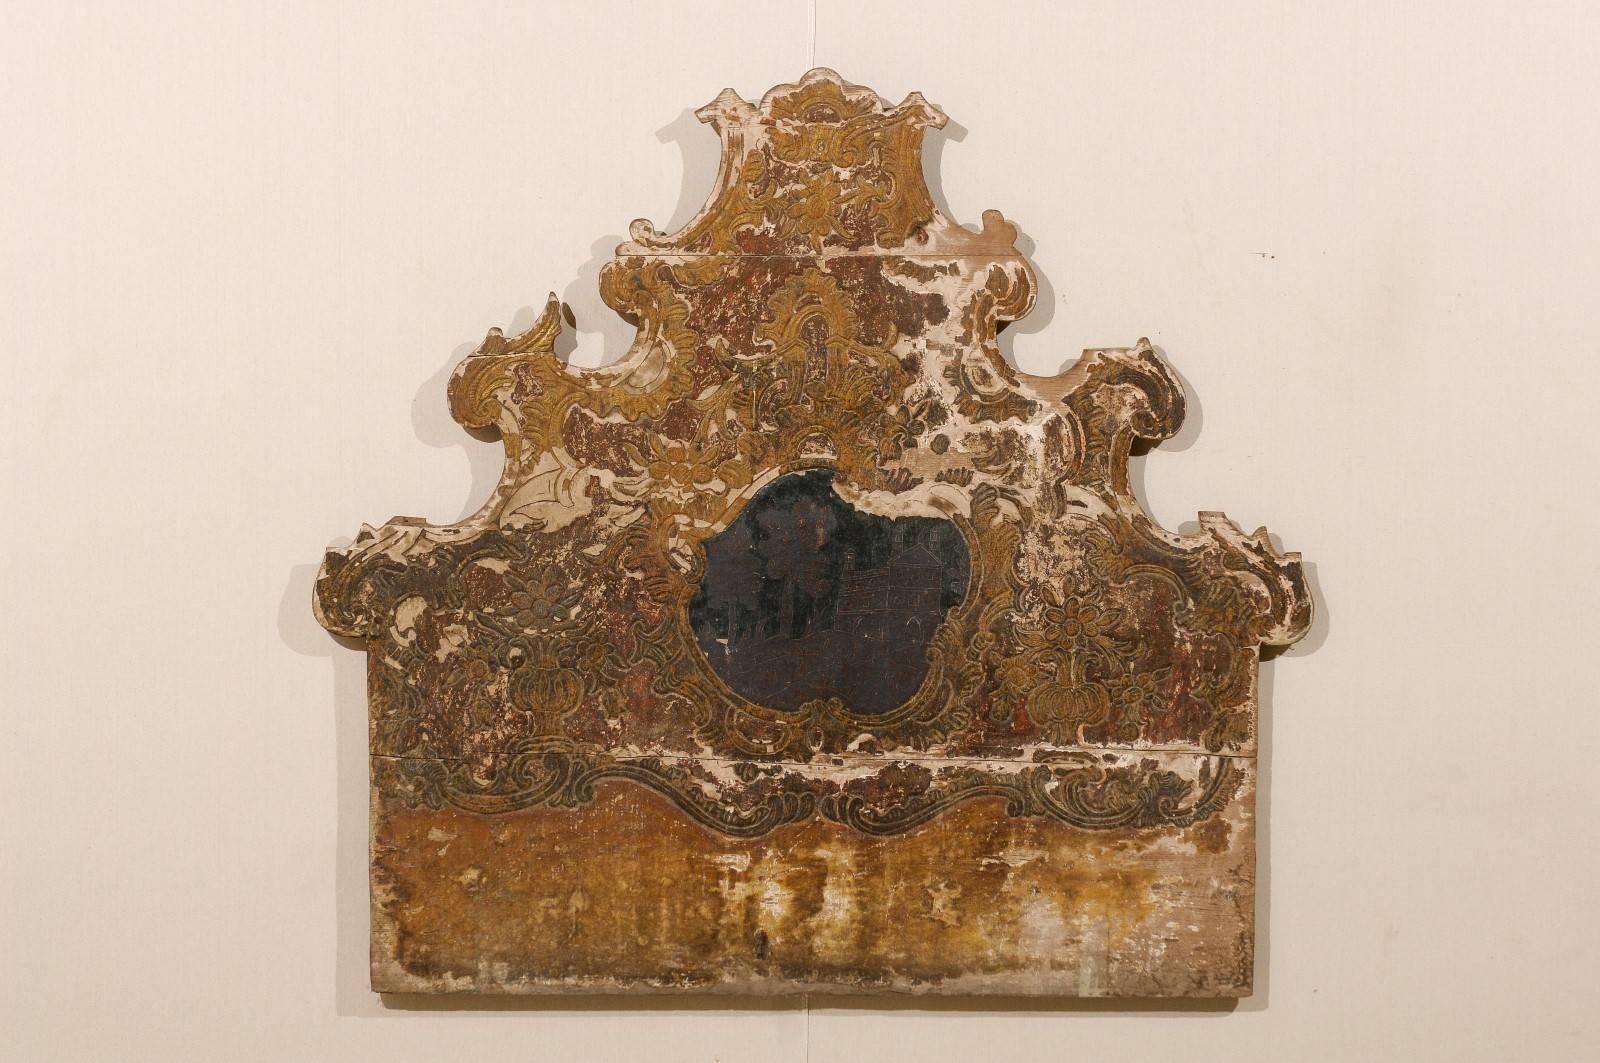 An ornately carved Spanish Rococo style wood headboard from the early 19th century. This headboard has its original paint which includes colors of a burnished red and warm yellow. There are traces of cream / brown color paint. The headboard is